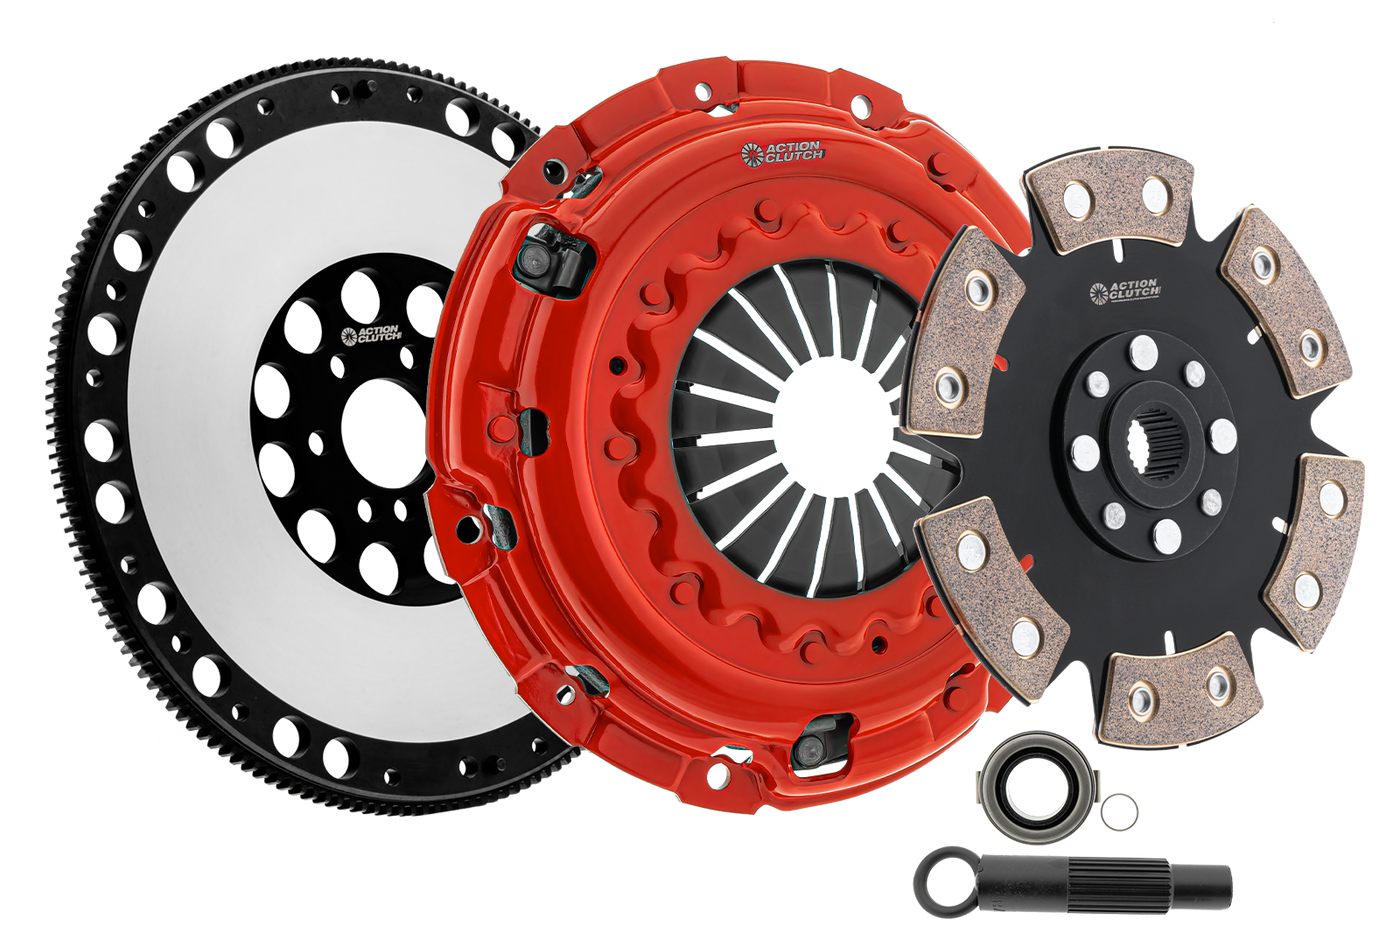 Stage 6 Clutch Kit (2MD) for Acura RSX 2002-2006 2.0L DOHC (K20A3) Includes Lightened Flywheel